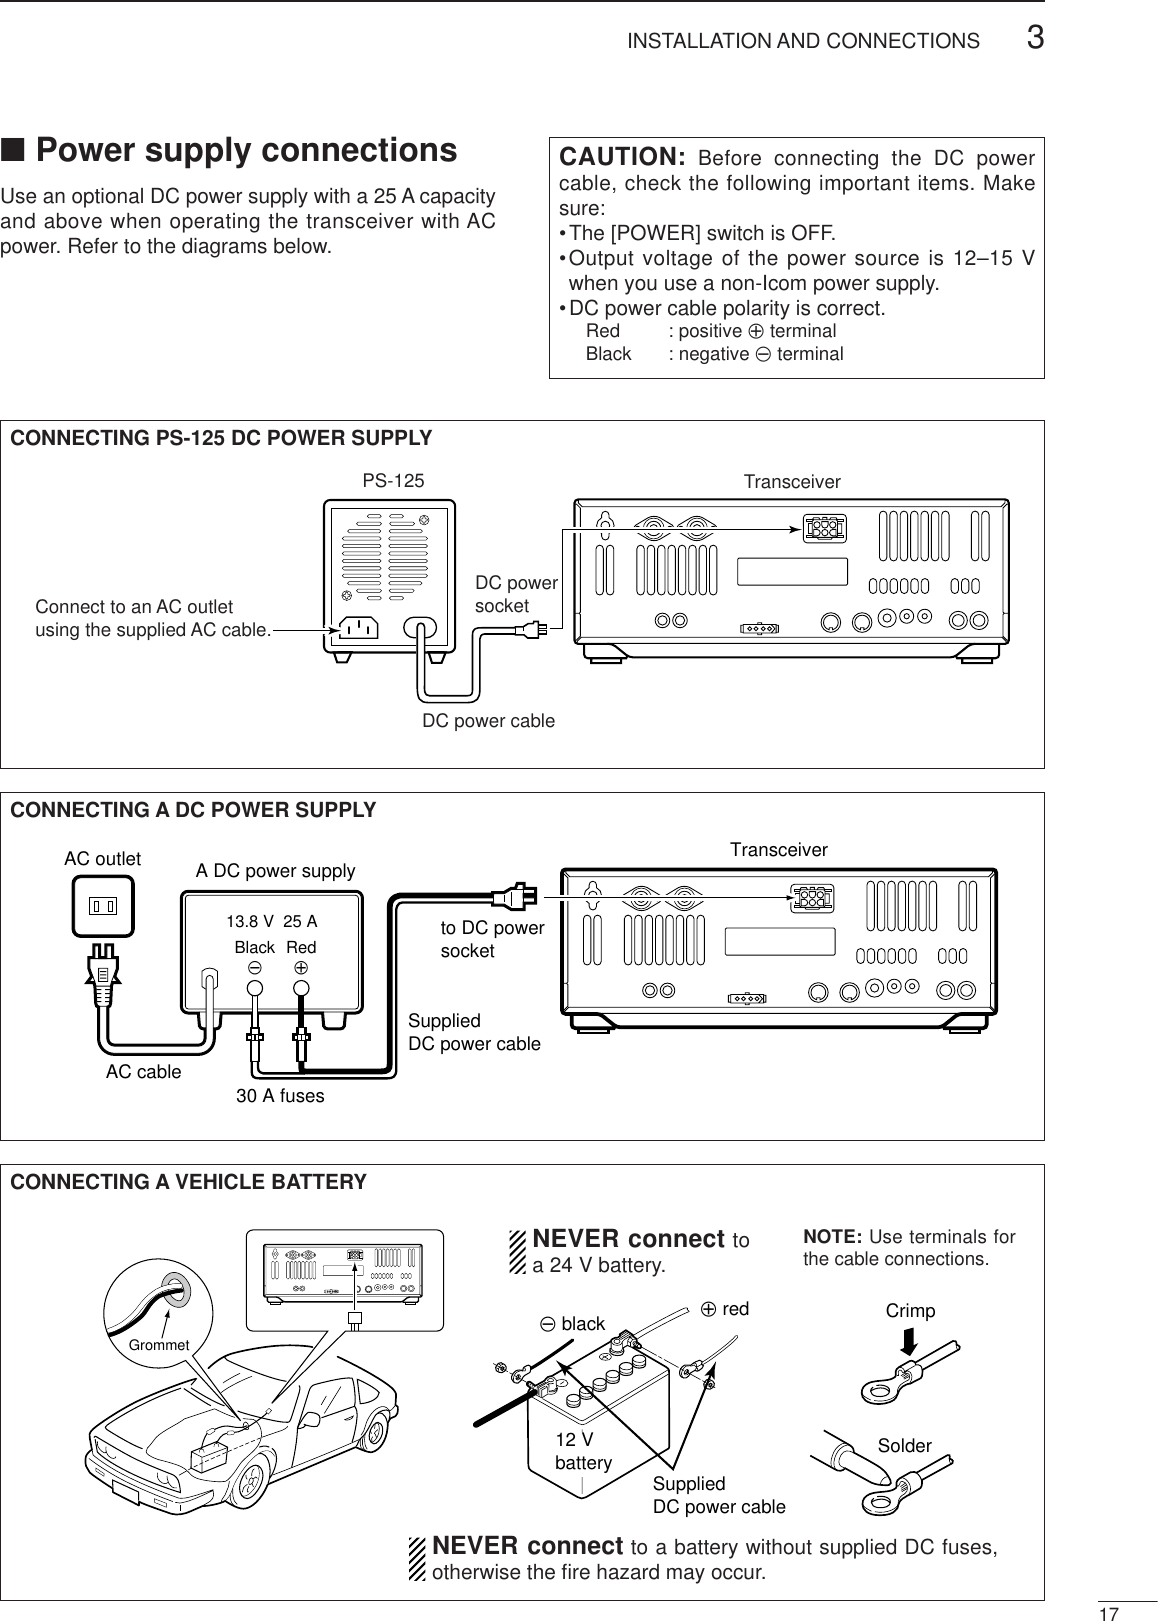 173INSTALLATION AND CONNECTIONS■Power supply connectionsUse an optional DC power supply with a 25 A capacityand above when operating the transceiver with ACpower. Refer to the diagrams below.CAUTION: Before connecting the DC powercable, check the following important items. Makesure:•The [POWER] switch is OFF.•Output voltage of the power source is 12–15 Vwhen you use a non-Icom power supply.•DC power cable polarity is correct.Red : positive +terminalBlack : negative _terminalCONNECTING A DC POWER SUPPLYto DC power socketA DC power supplyAC outletAC cable30 A fusesSuppliedDC power cable13.8 V  25 ABlack_Red+TransceiverCONNECTING A VEHICLE BATTERY12 Vbattery SuppliedDC power cable+ red_ black CrimpSolderGrommetNEVER connect toa 24 V battery.NOTE: Use terminals forthe cable connections.NEVER connect to a battery without supplied DC fuses,otherwise the ﬁre hazard may occur.CONNECTING PS-125 DC POWER SUPPLYPS-125Connect to an AC outletusing the supplied AC cable.DC power cableDC powersocketTransceiver